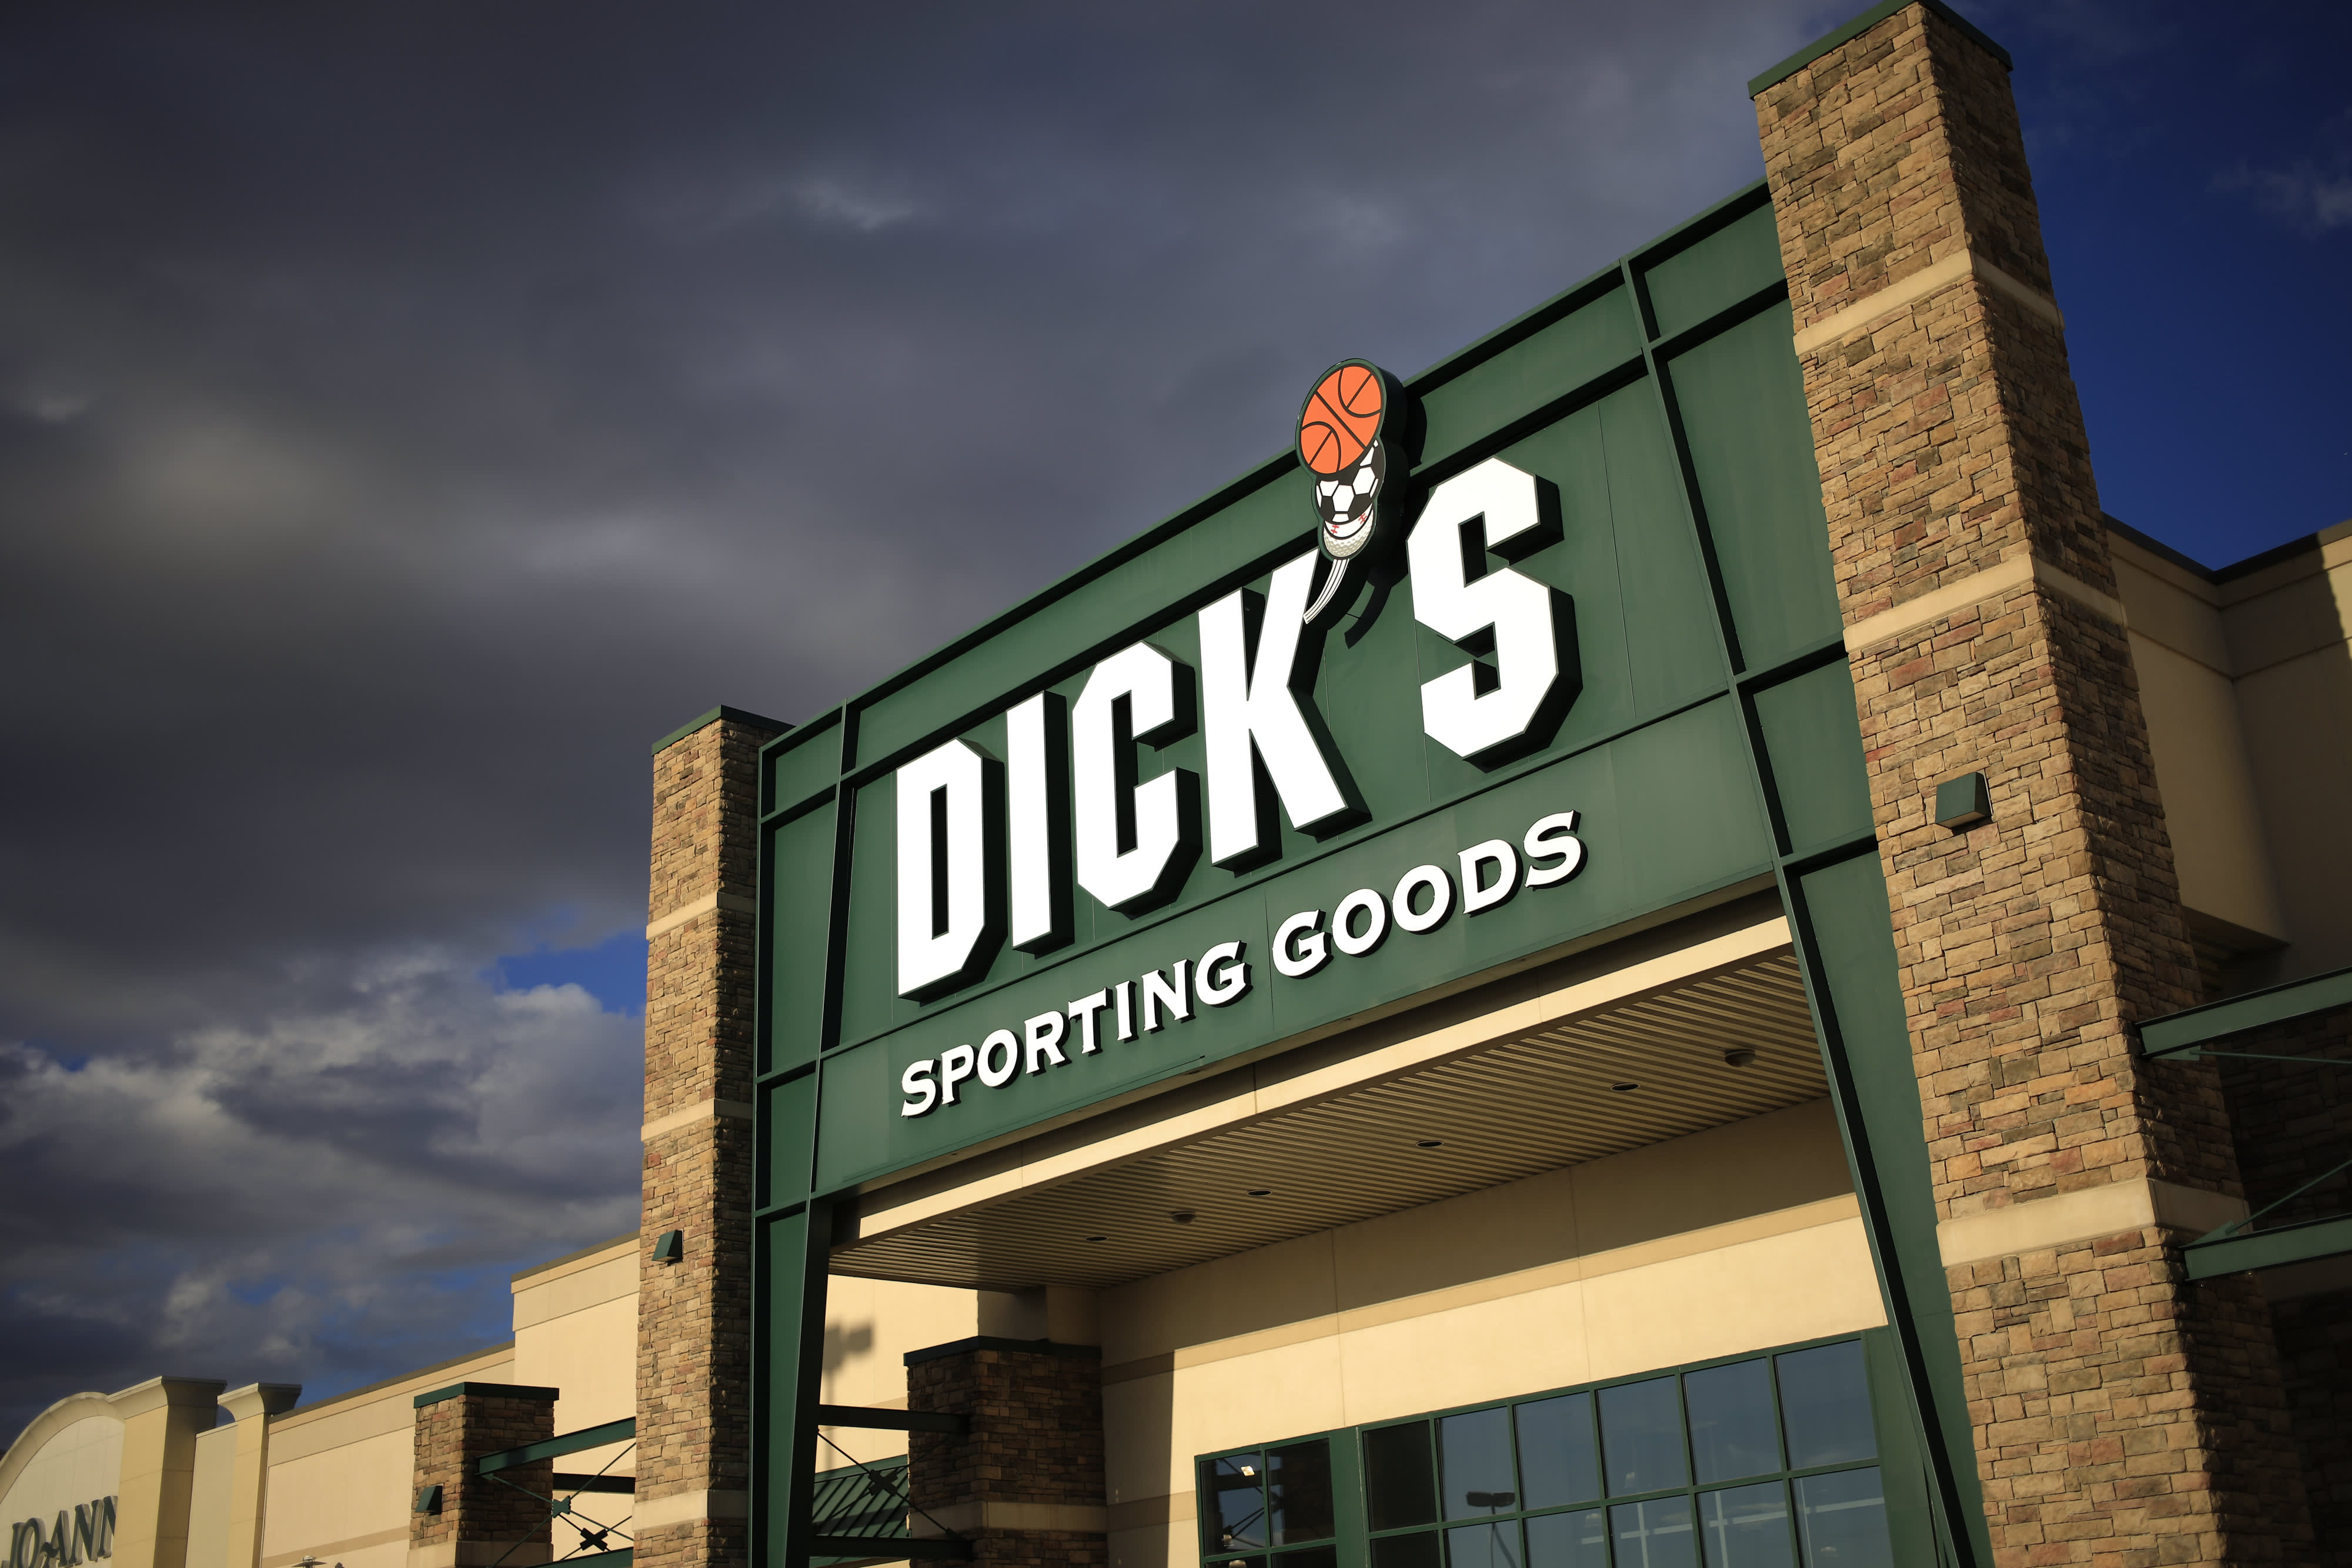 Dick's Sporting Goods, other retailers crack code of driving up profits